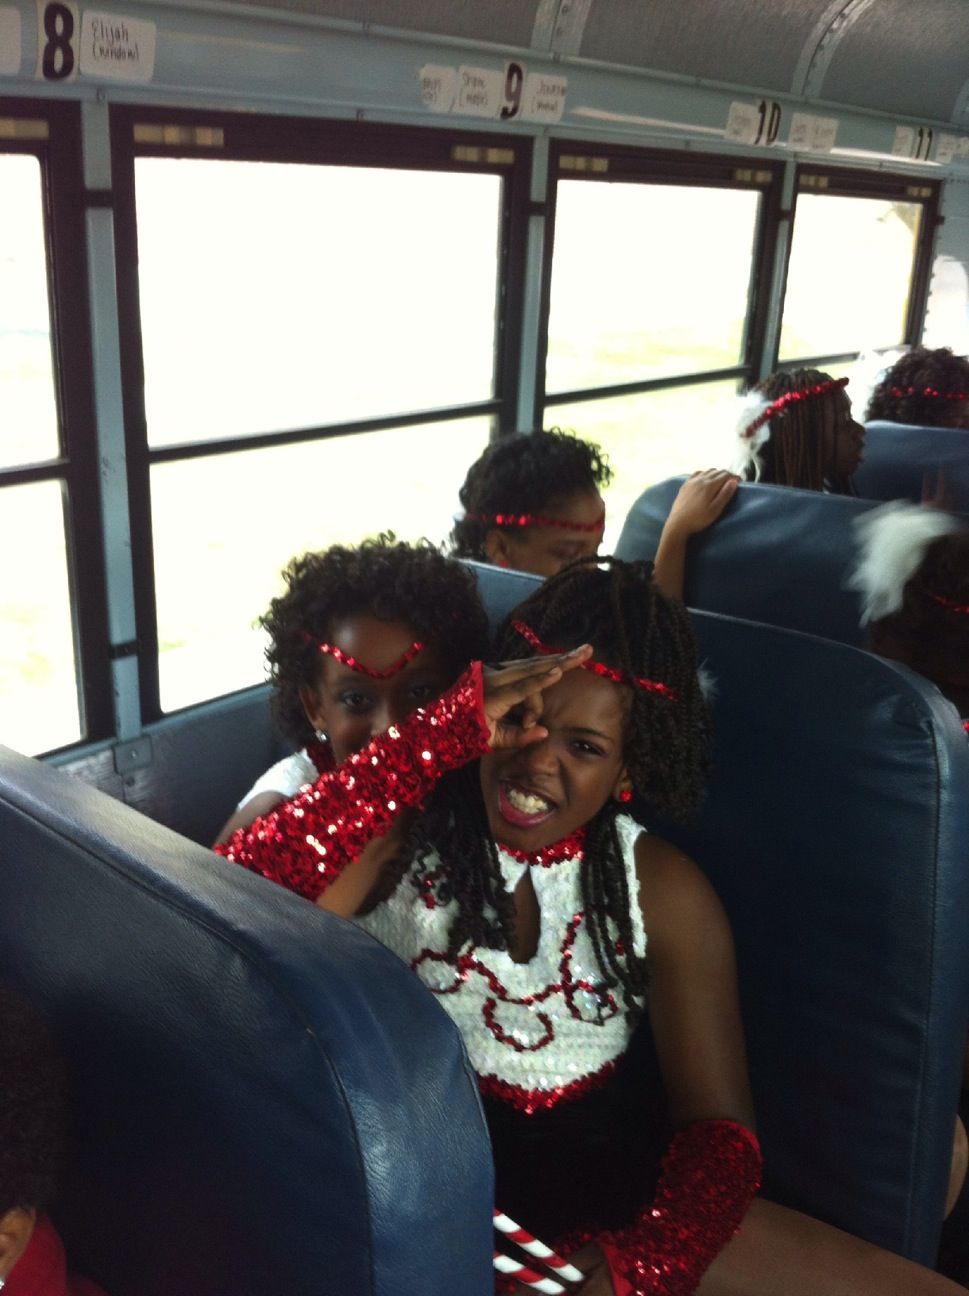 On the way to the parade